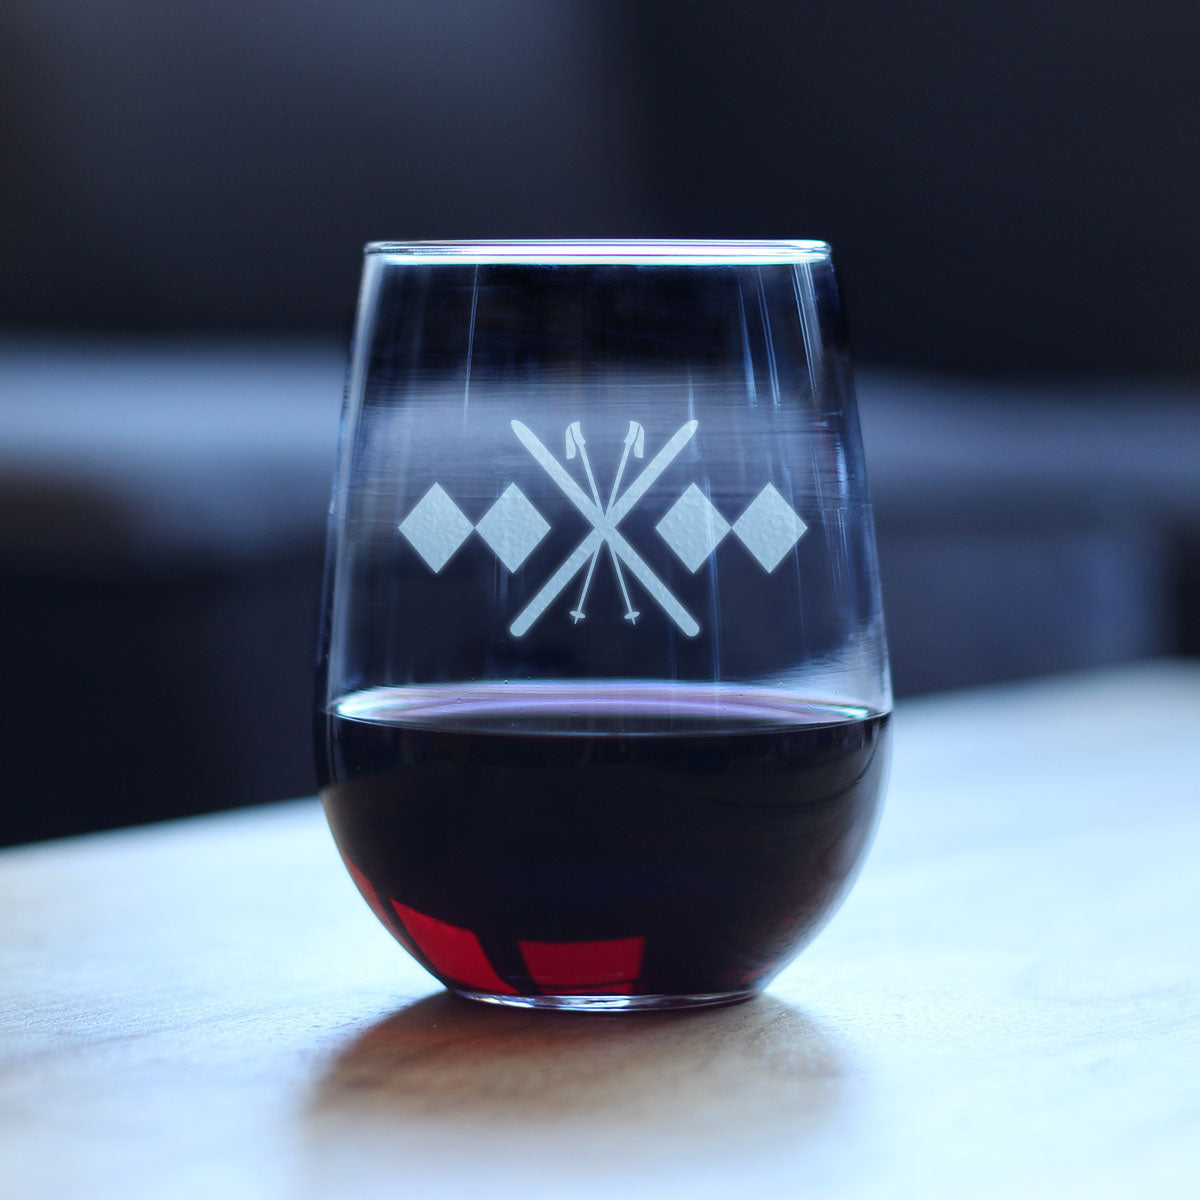 Double Black Diamond - Stemless Wine Glass - Unique Skiing Themed Decor and Gifts for Mountain Lovers - Large 17 Oz Glasses